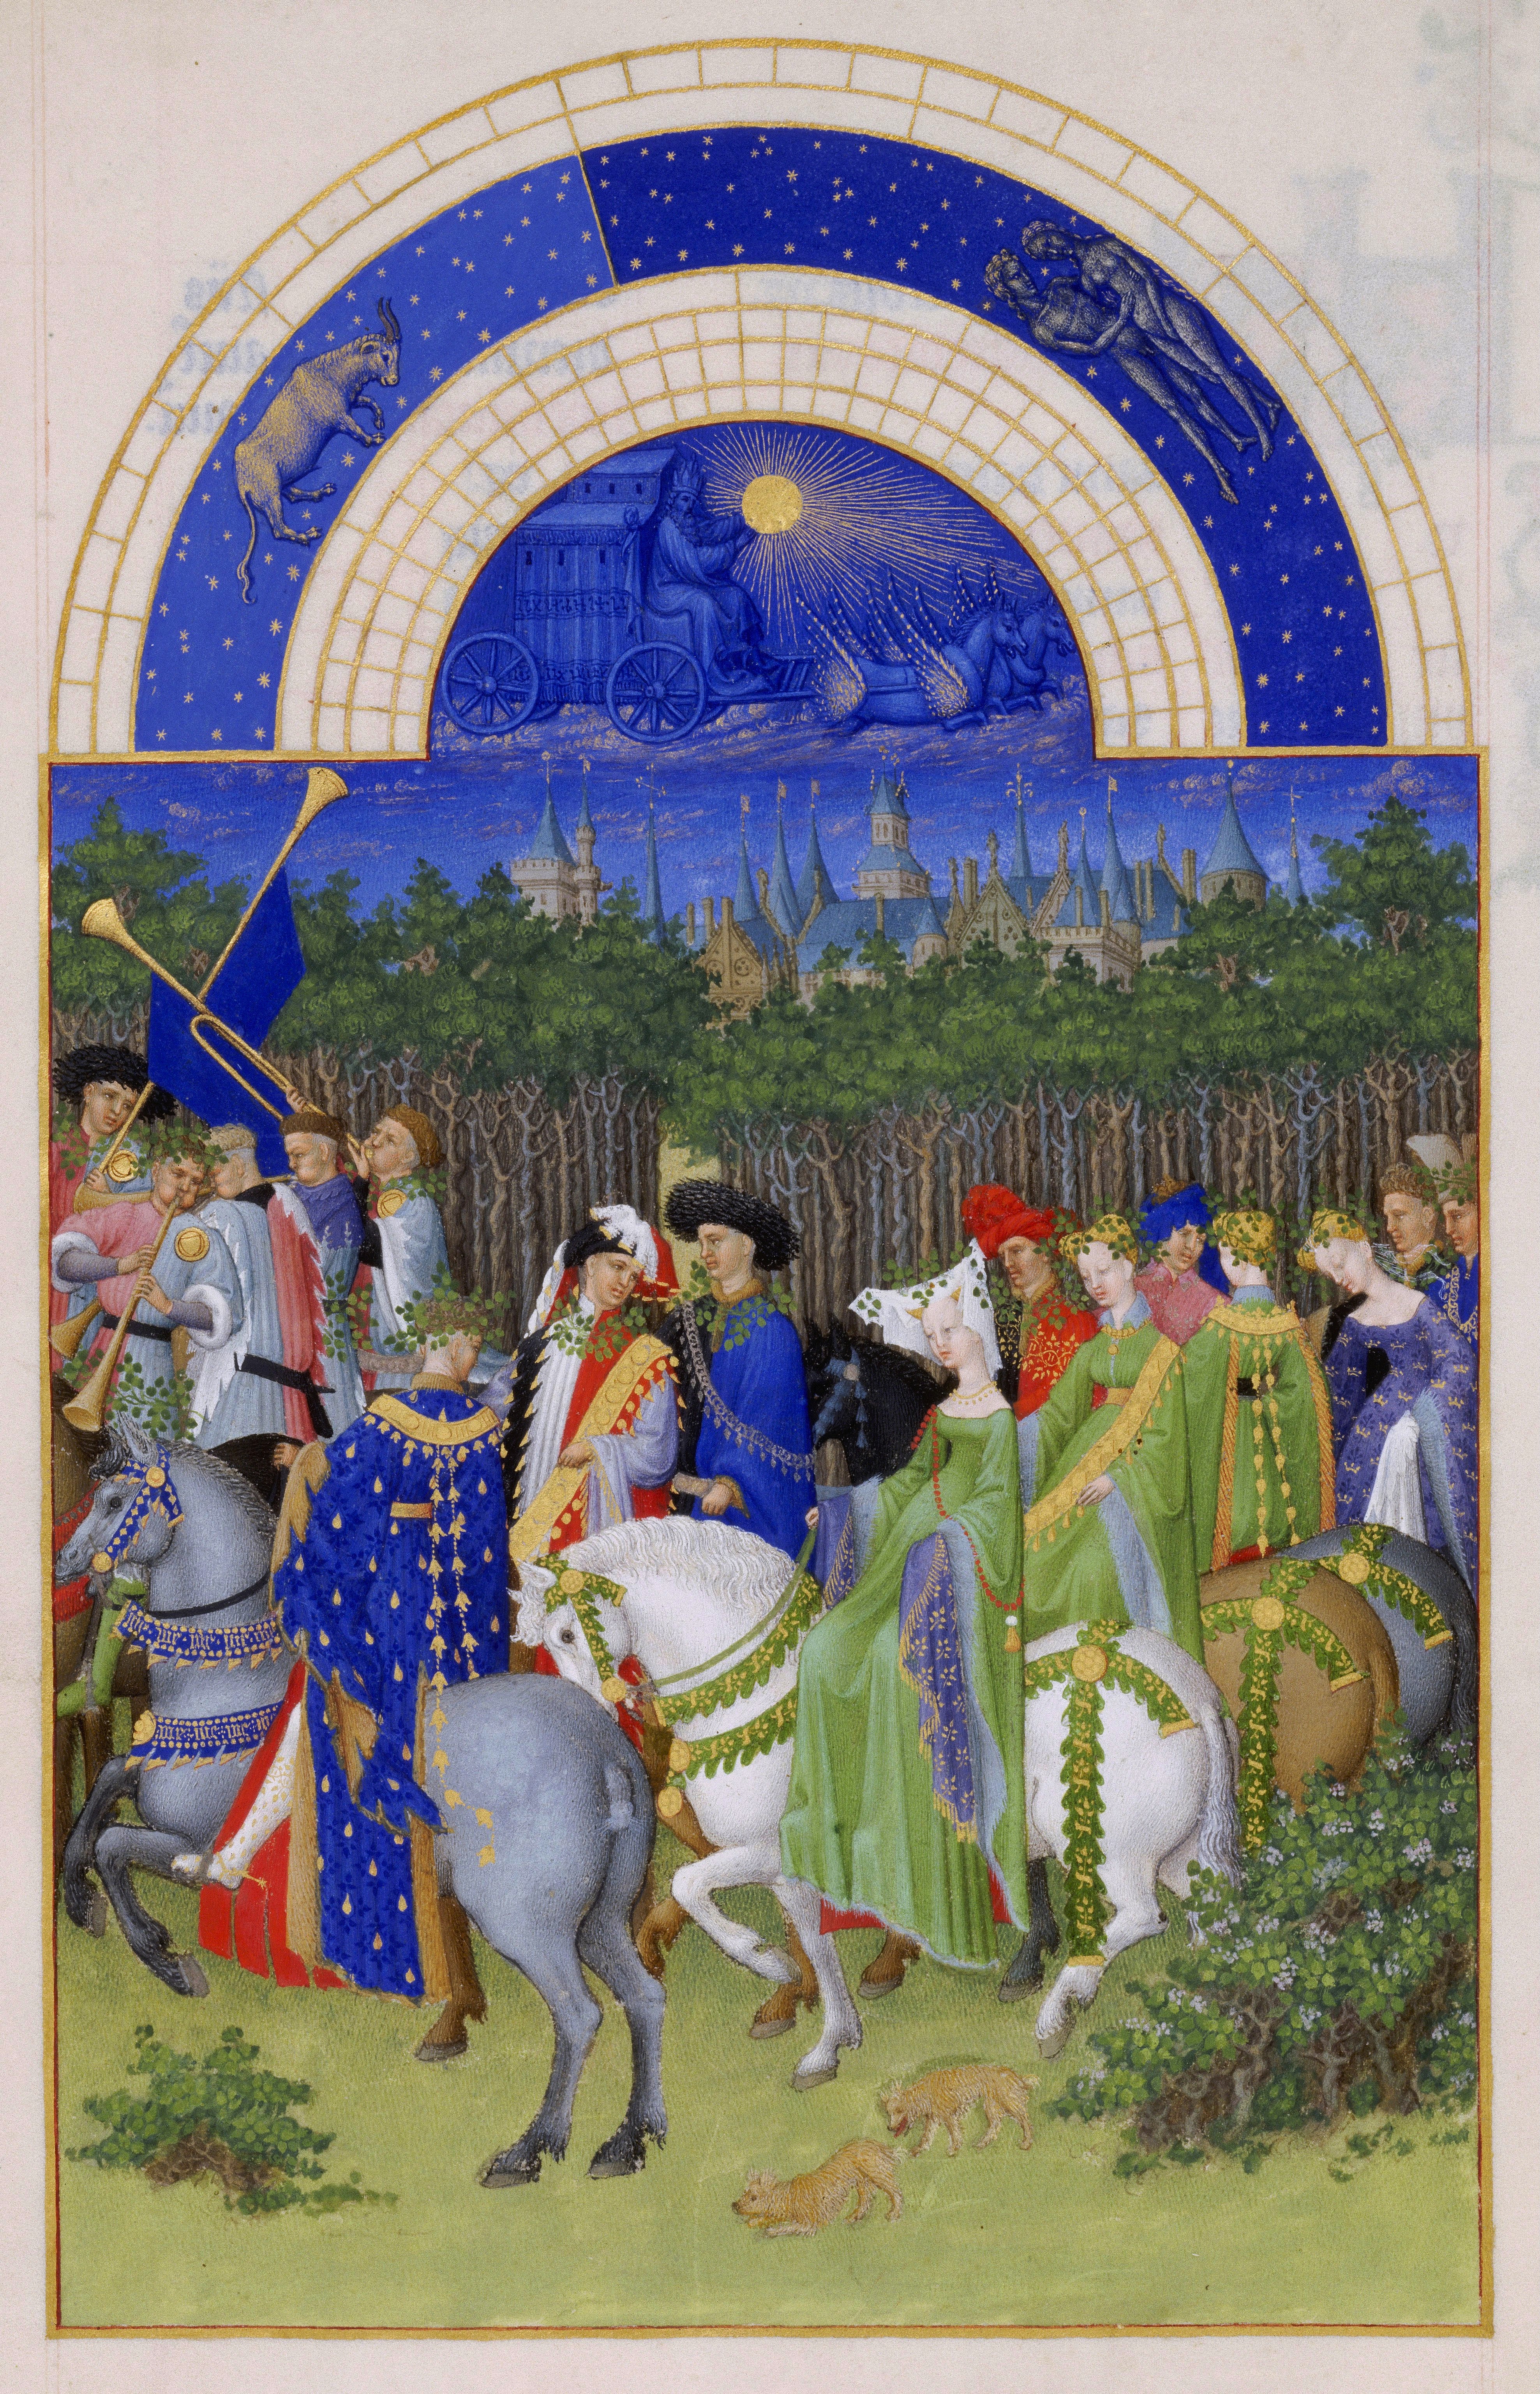 Limbourg Brothers, "The Book of Hours." Celebrating the first day of May. The procession goes to the forest to collect branches and flowers.